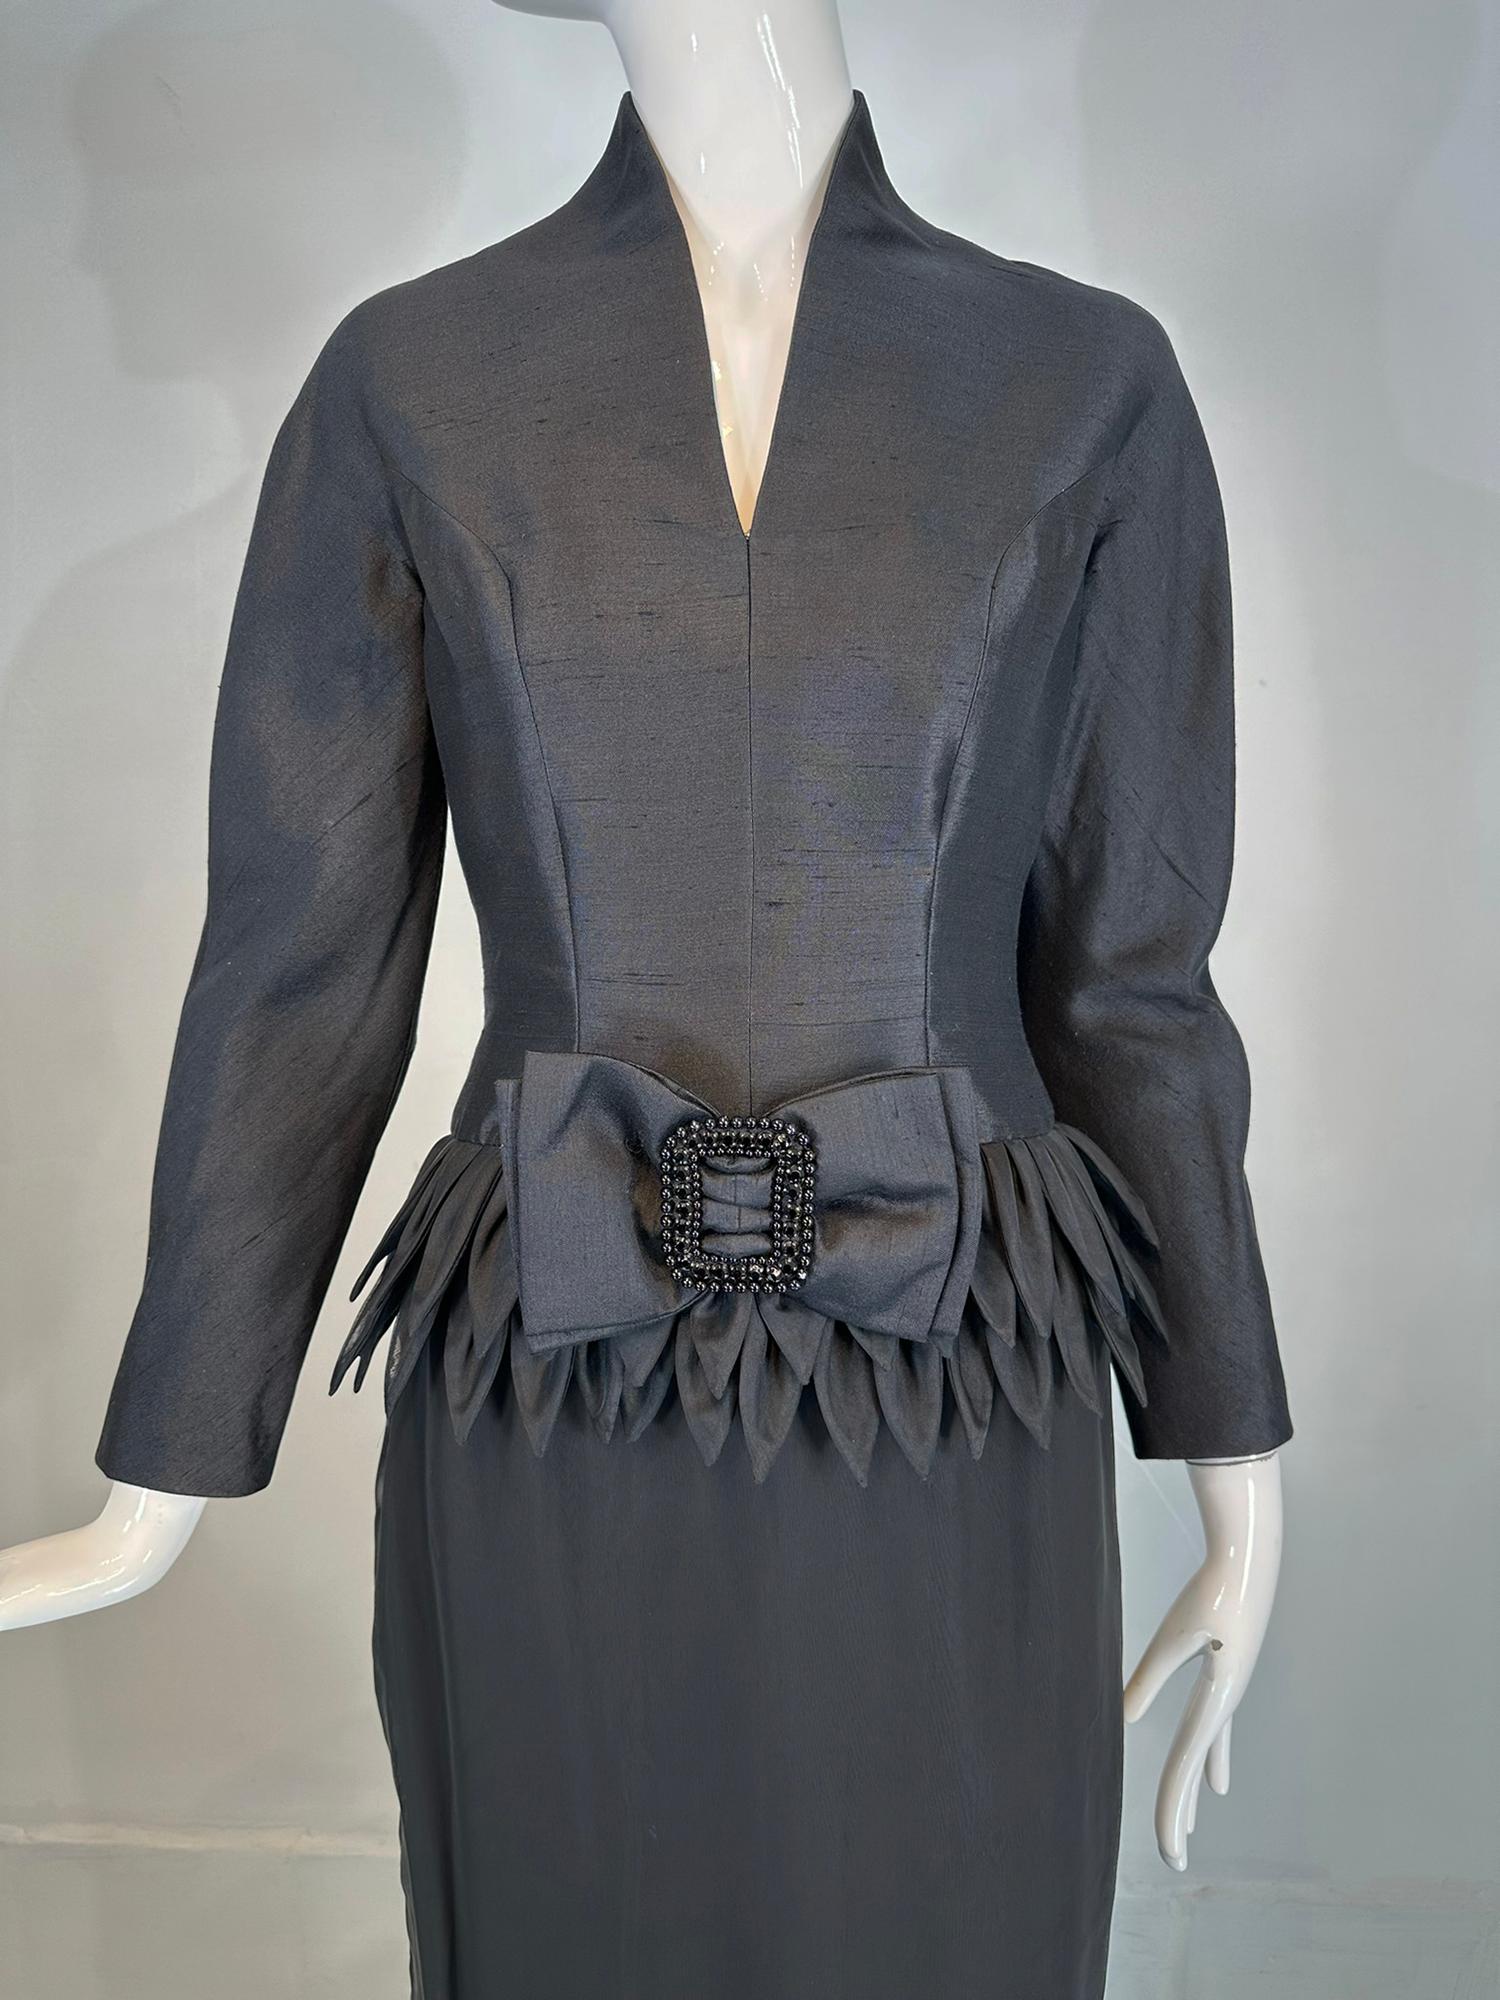 Vinchi Demi Couture black silk hand rolled petal evening dress from the 1960s, Hong Kong. Hong Kong has always been a mecca of hand tailoring. Known in the 50's & 60's for beaded extravaganzas of silk evening & cocktail dresses, couture quality, for